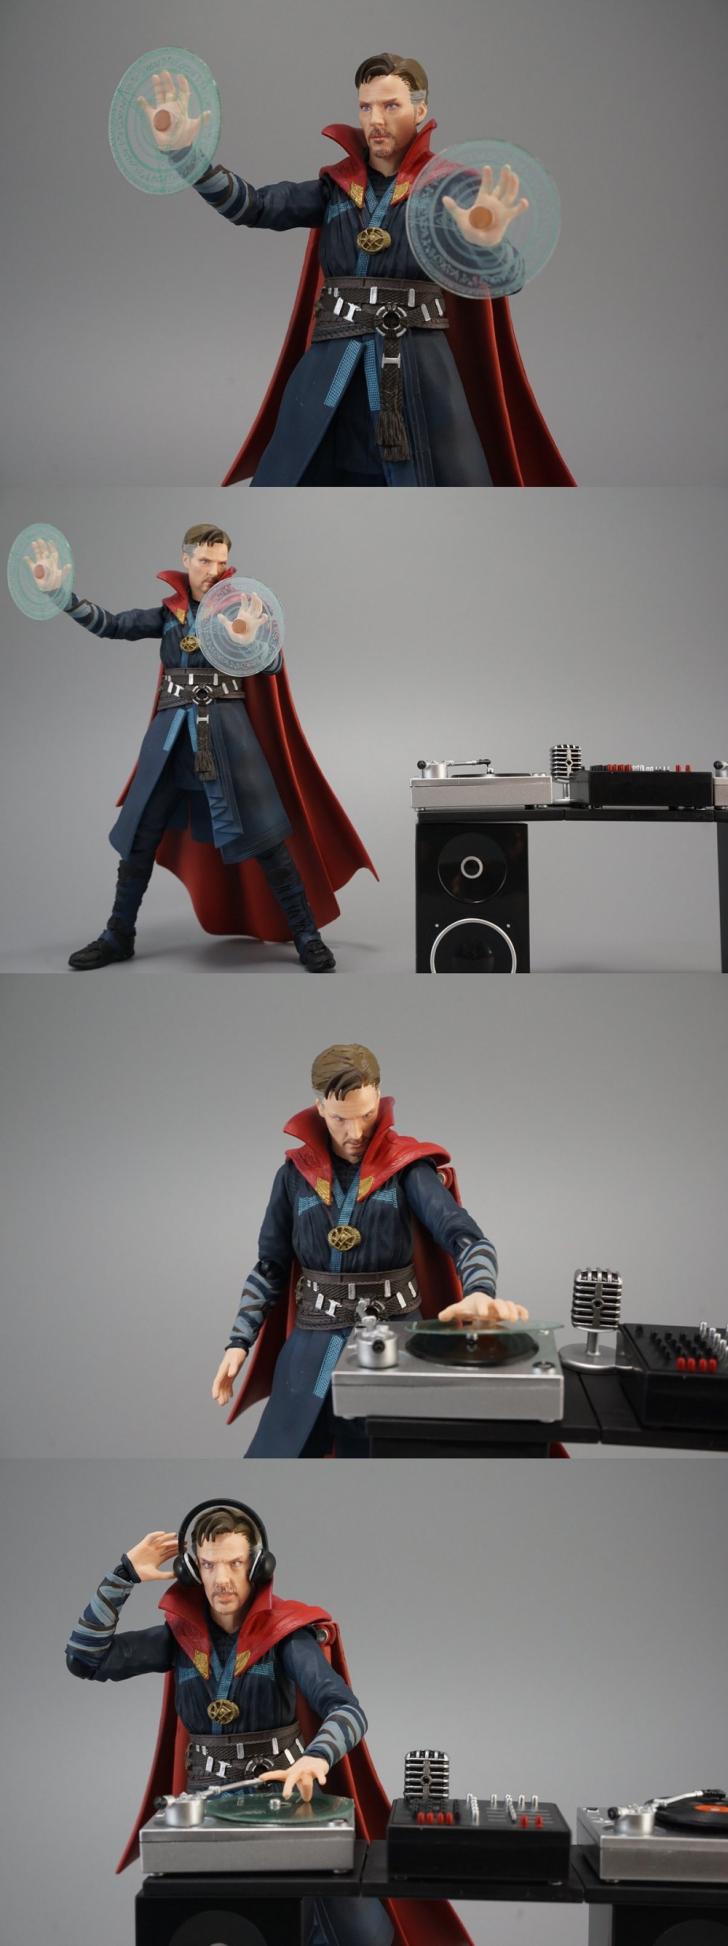 Doctor+Strange+was+actually+meant+for+something+greater